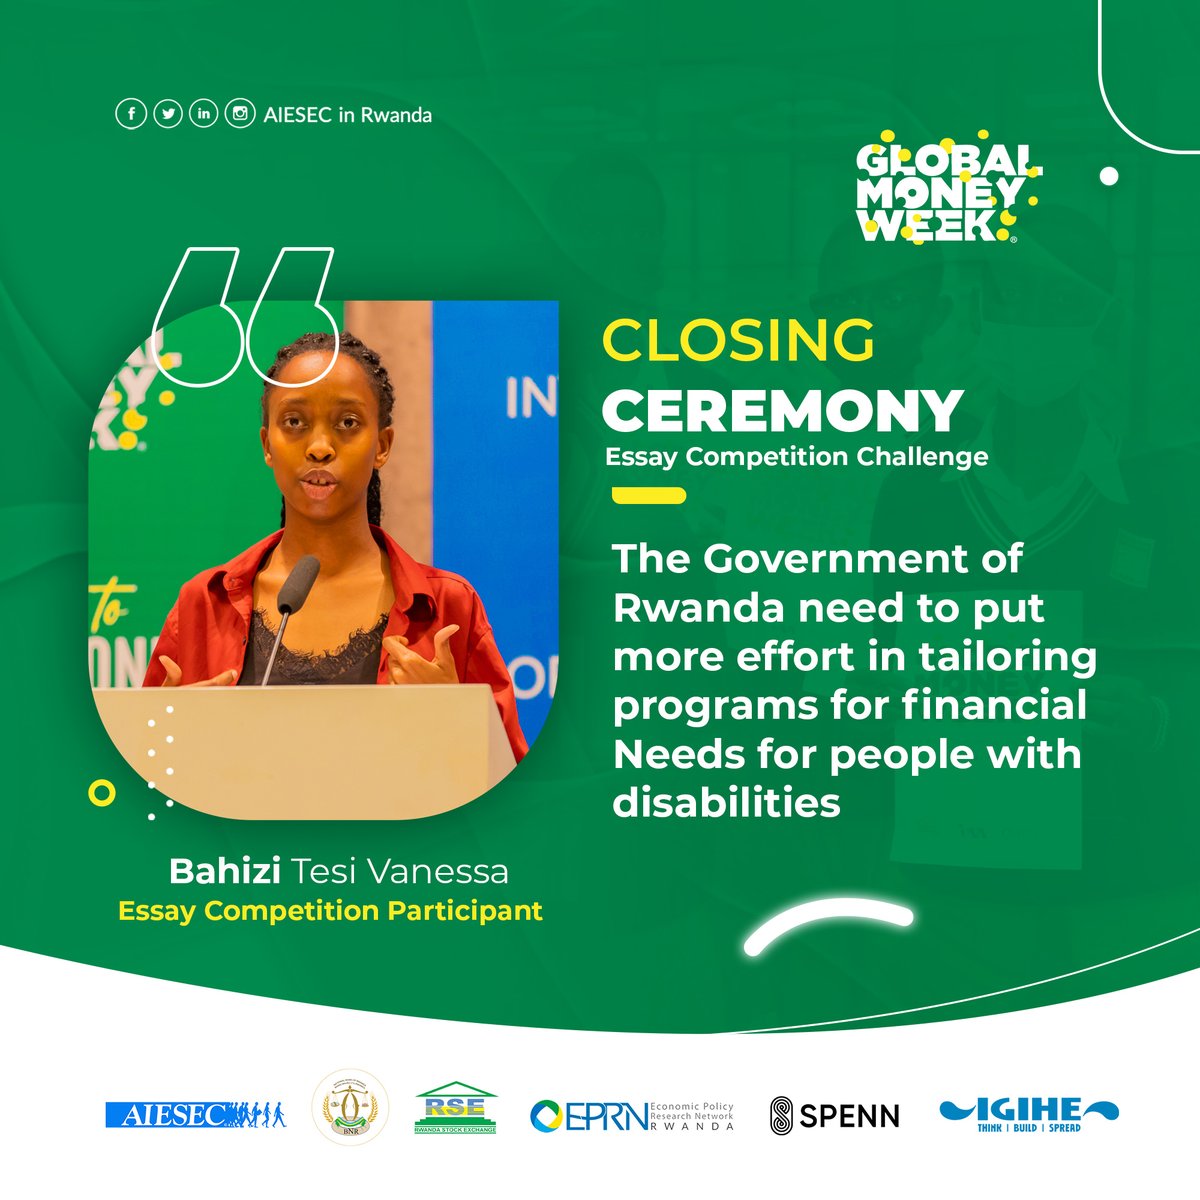 Essay competition pitching still in live. Bahizi Tesi Vanessa a #GlobalMoneyWeek2023 Competition Participant suggested government of Rwanda to put more effort in tailoring programs for financial needs for people with disabilities.
#Planyourmoney #Plantyourfuture #GMW2023